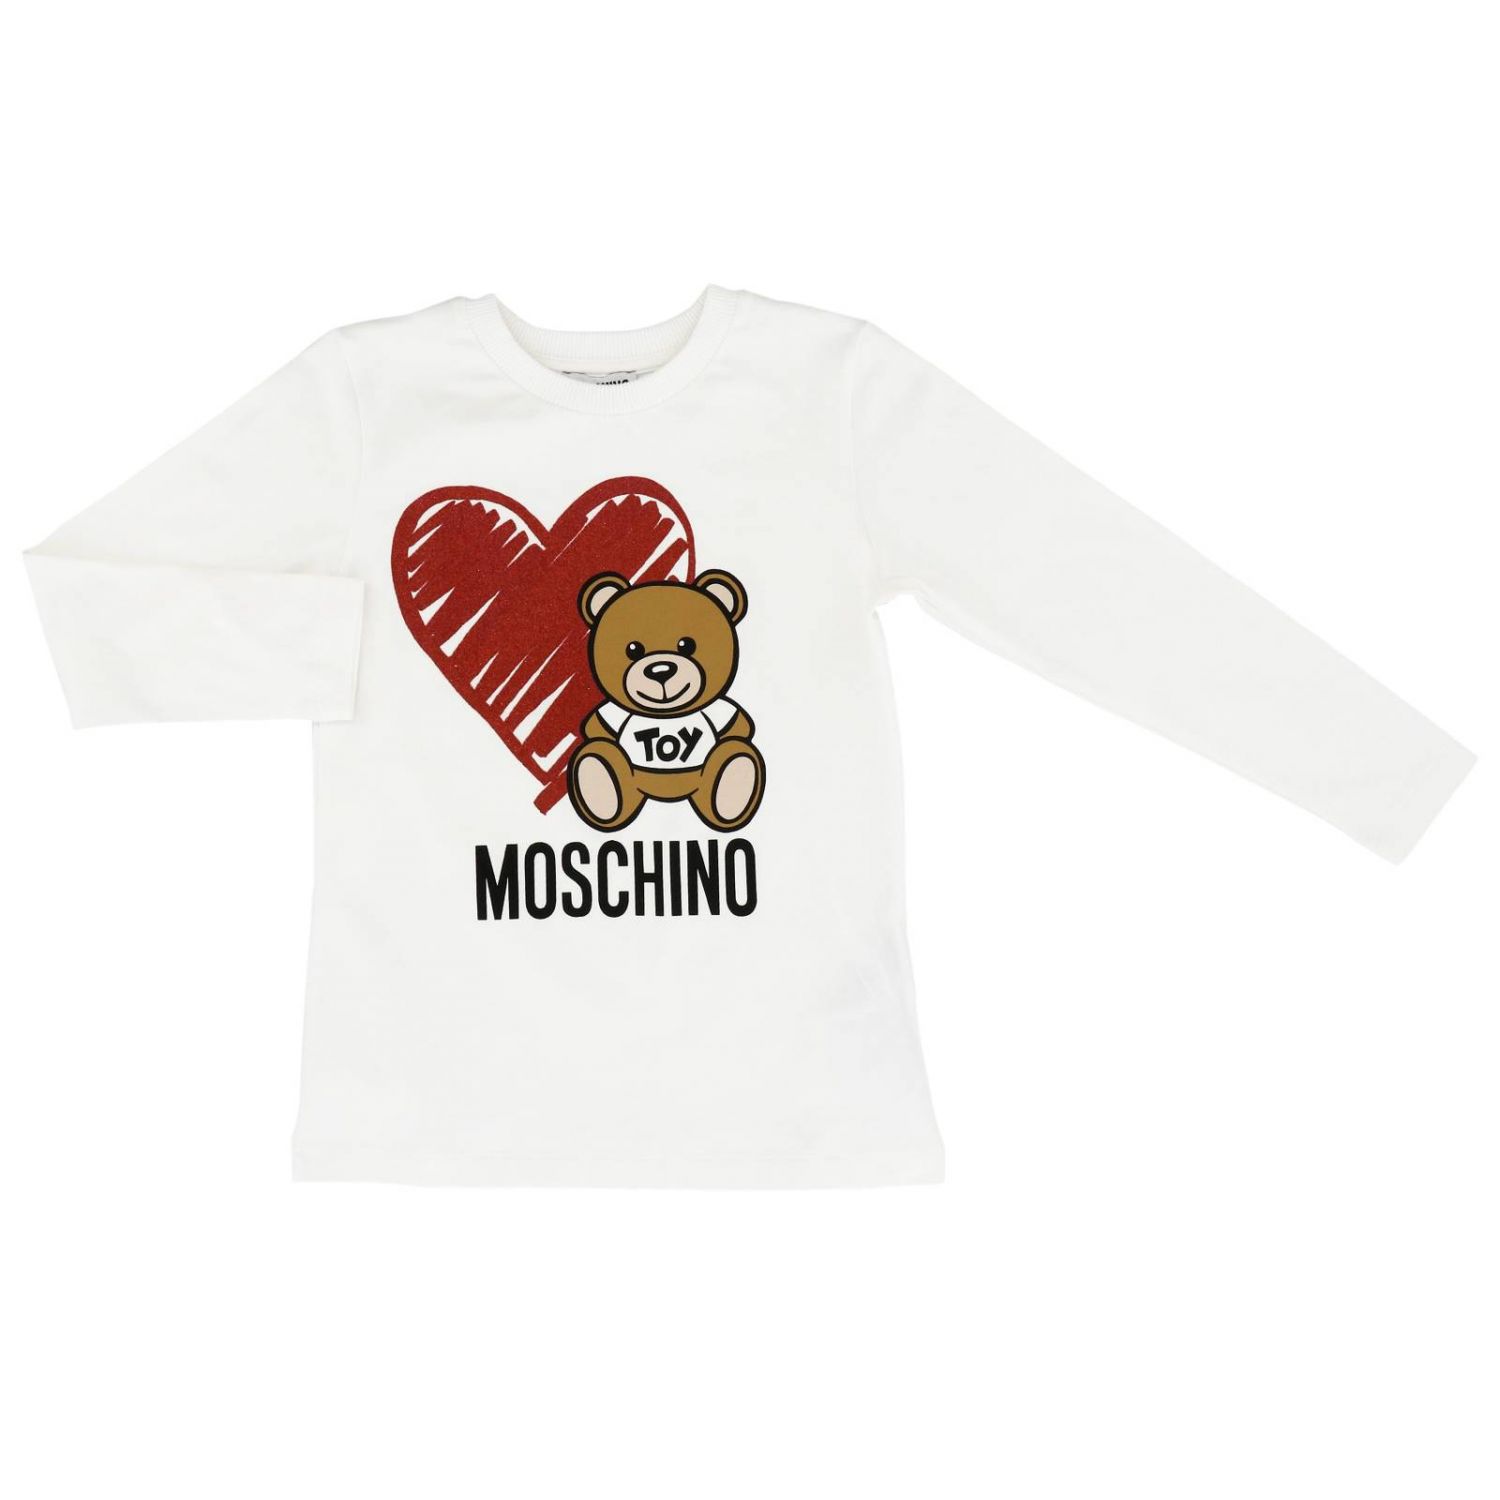 Moschino Kid Outlet: t-shirt for girl - White | Moschino Kid t-shirt ...